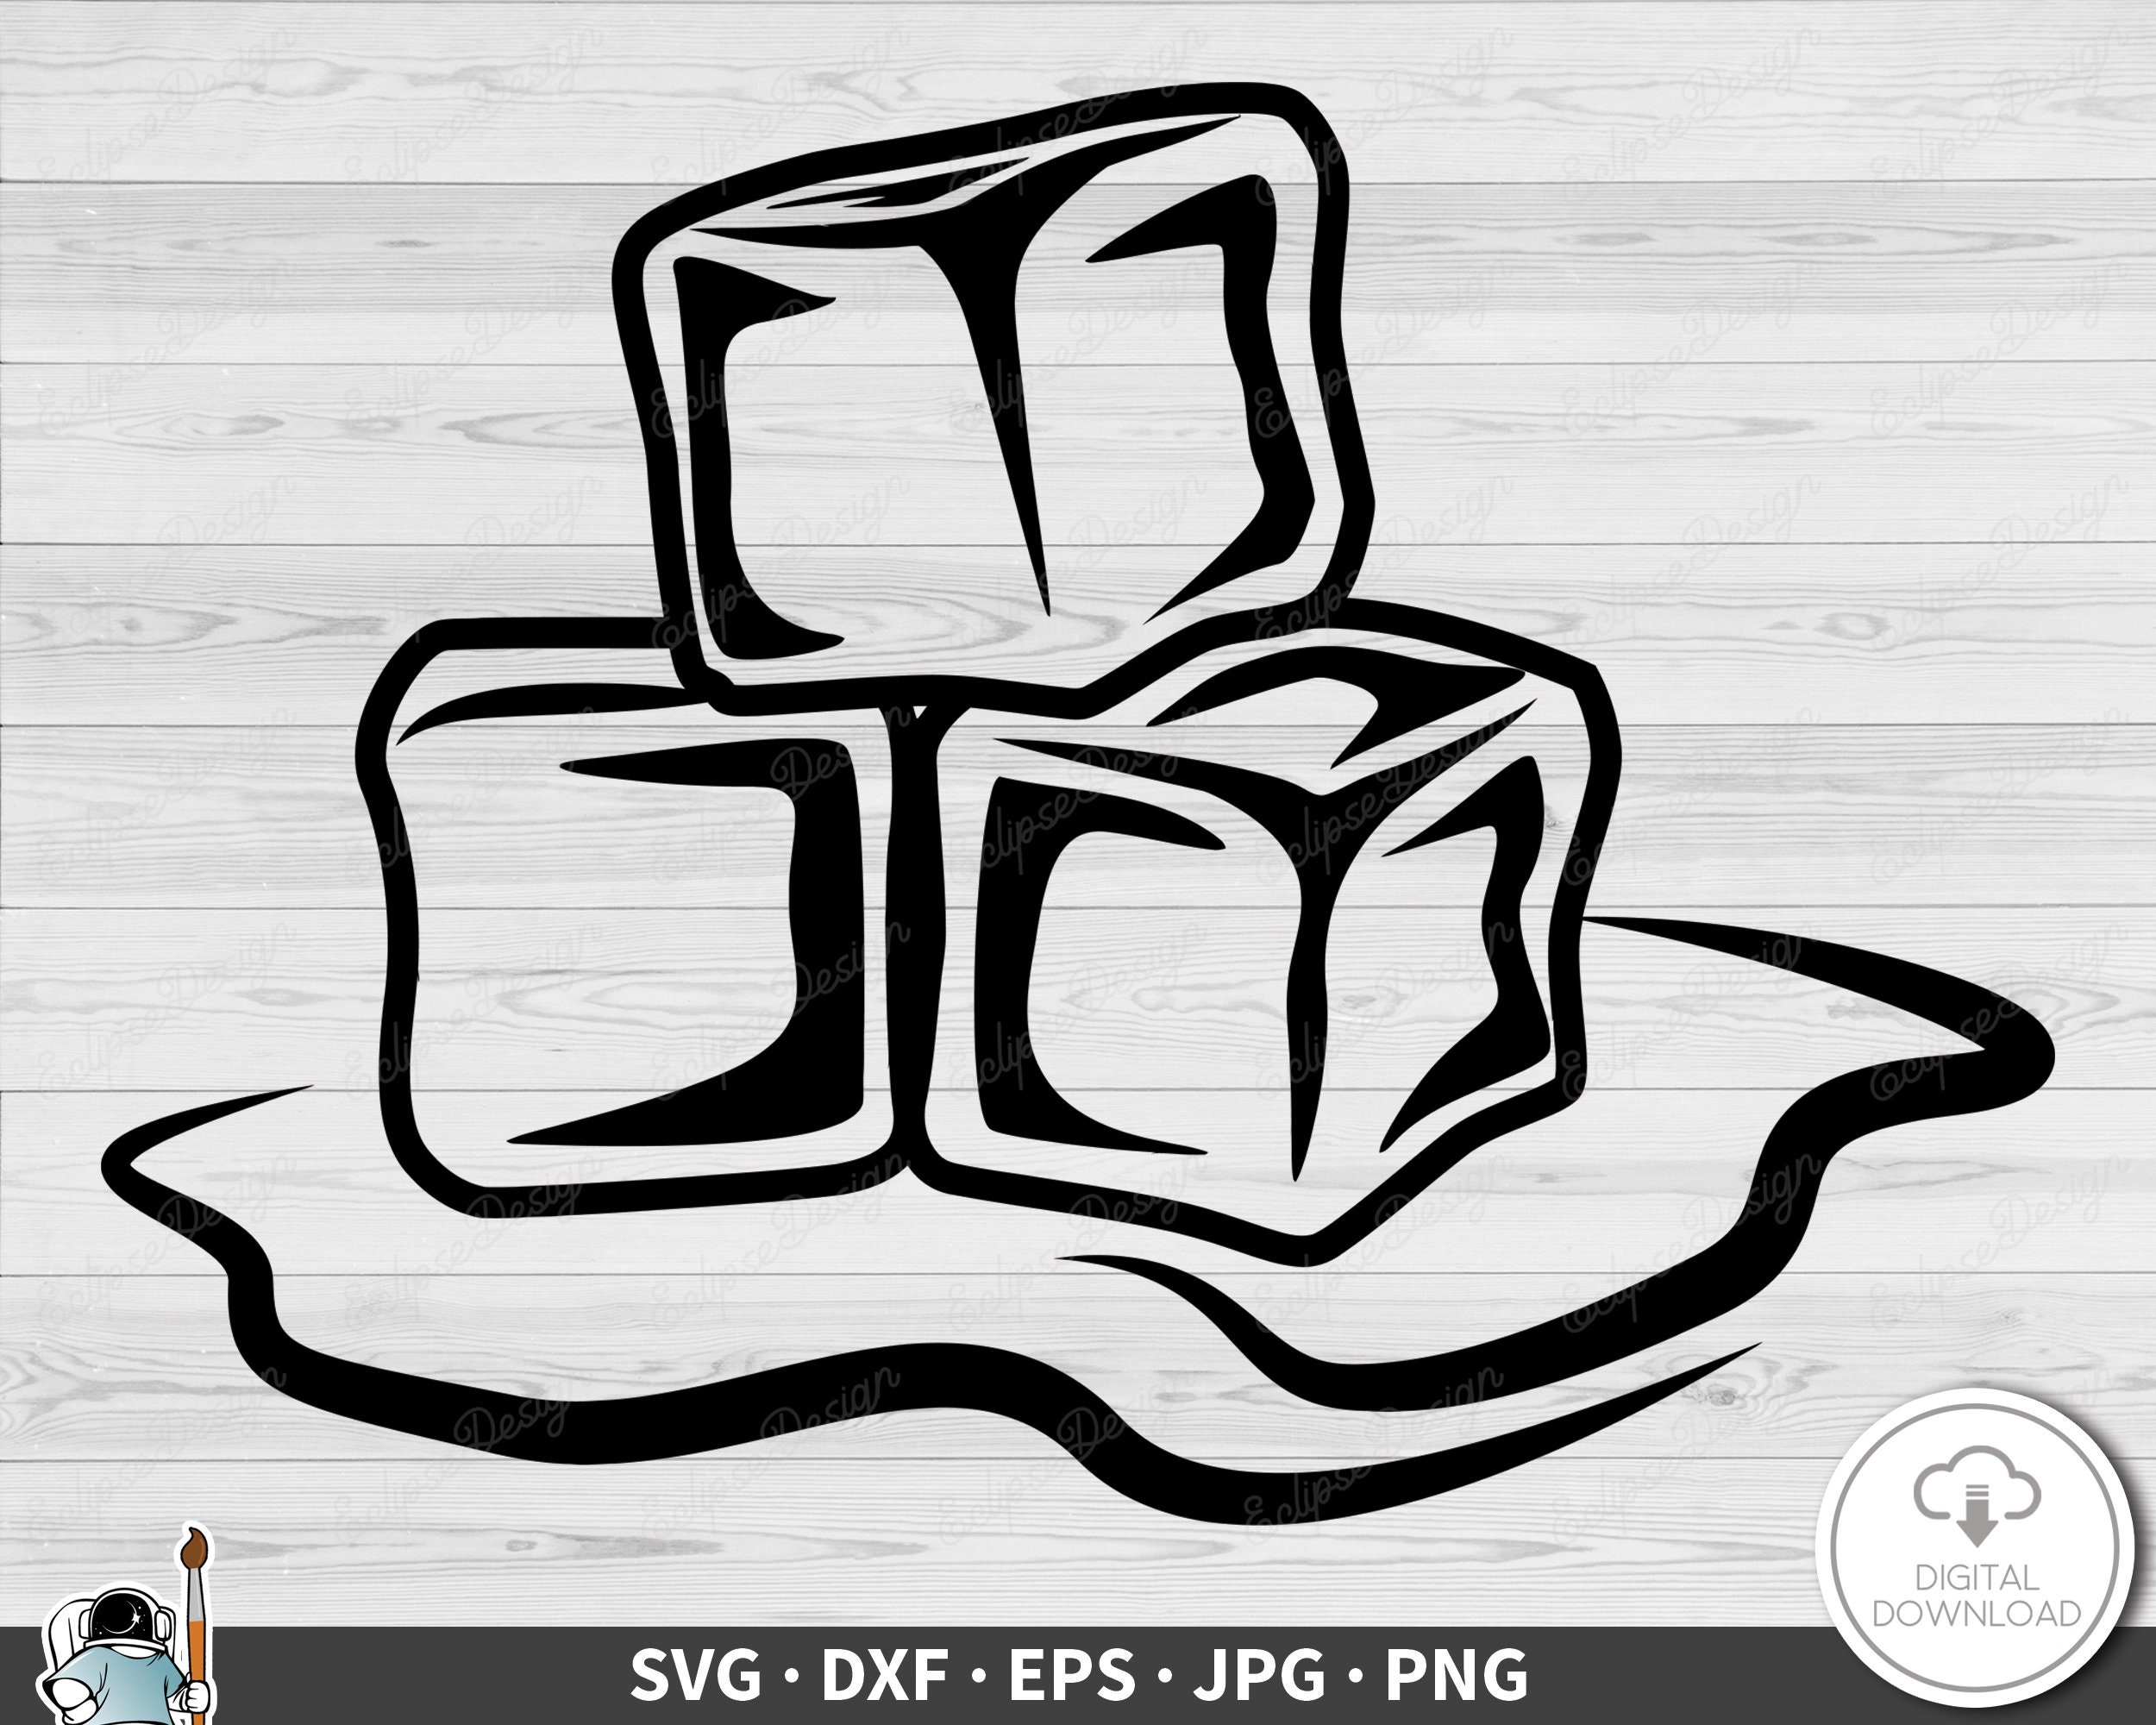 Melting Ice Cubes Clipart Vector Vector Art & Graphics